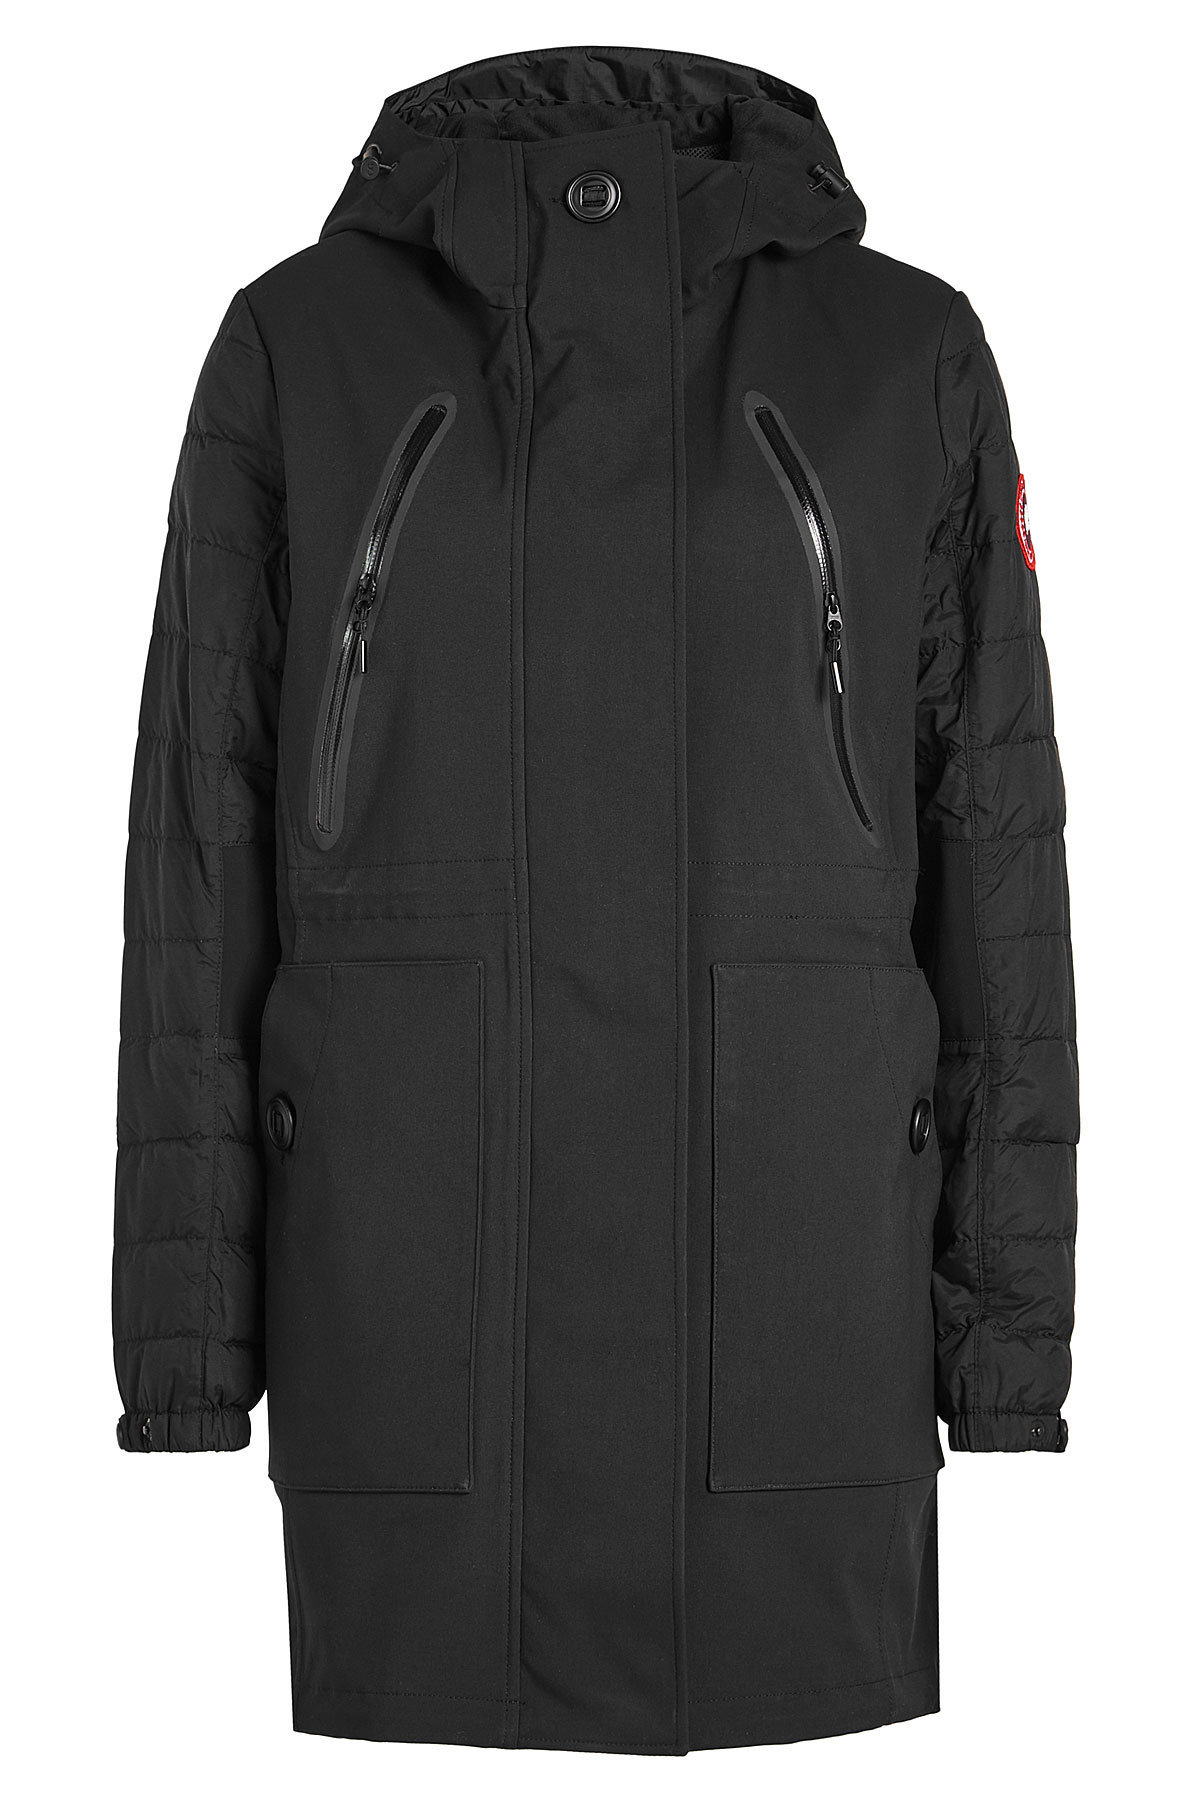 Sabine Coat with Down Sleeves by Canada Goose